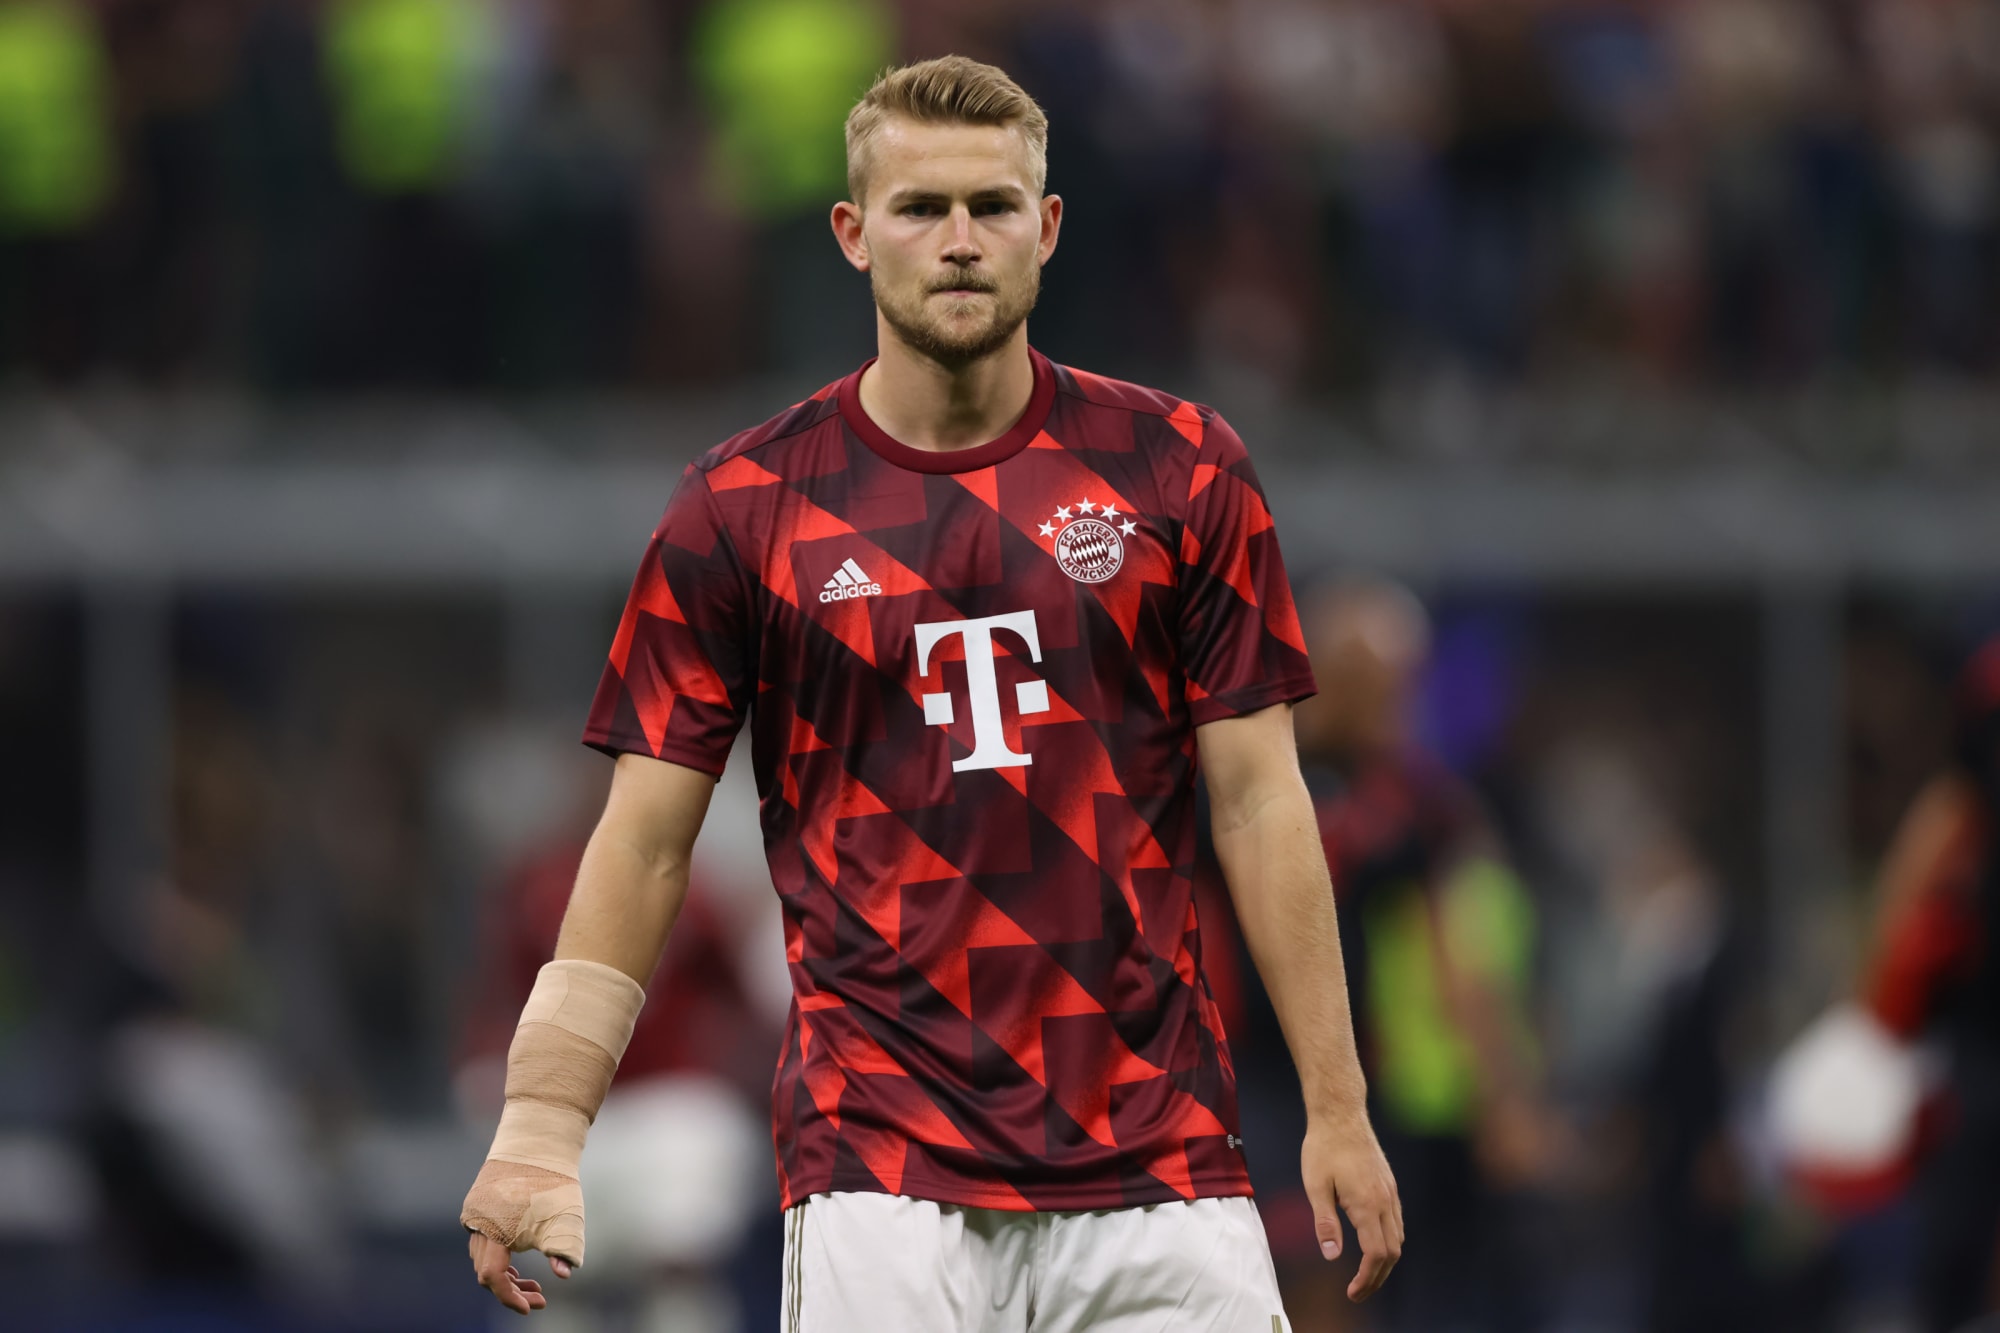  Matthijs de Ligt, a Dutch professional soccer player who plays as a defender for Bundesliga club Bayern Munich and the Netherlands national team, is seen here playing a soccer match.